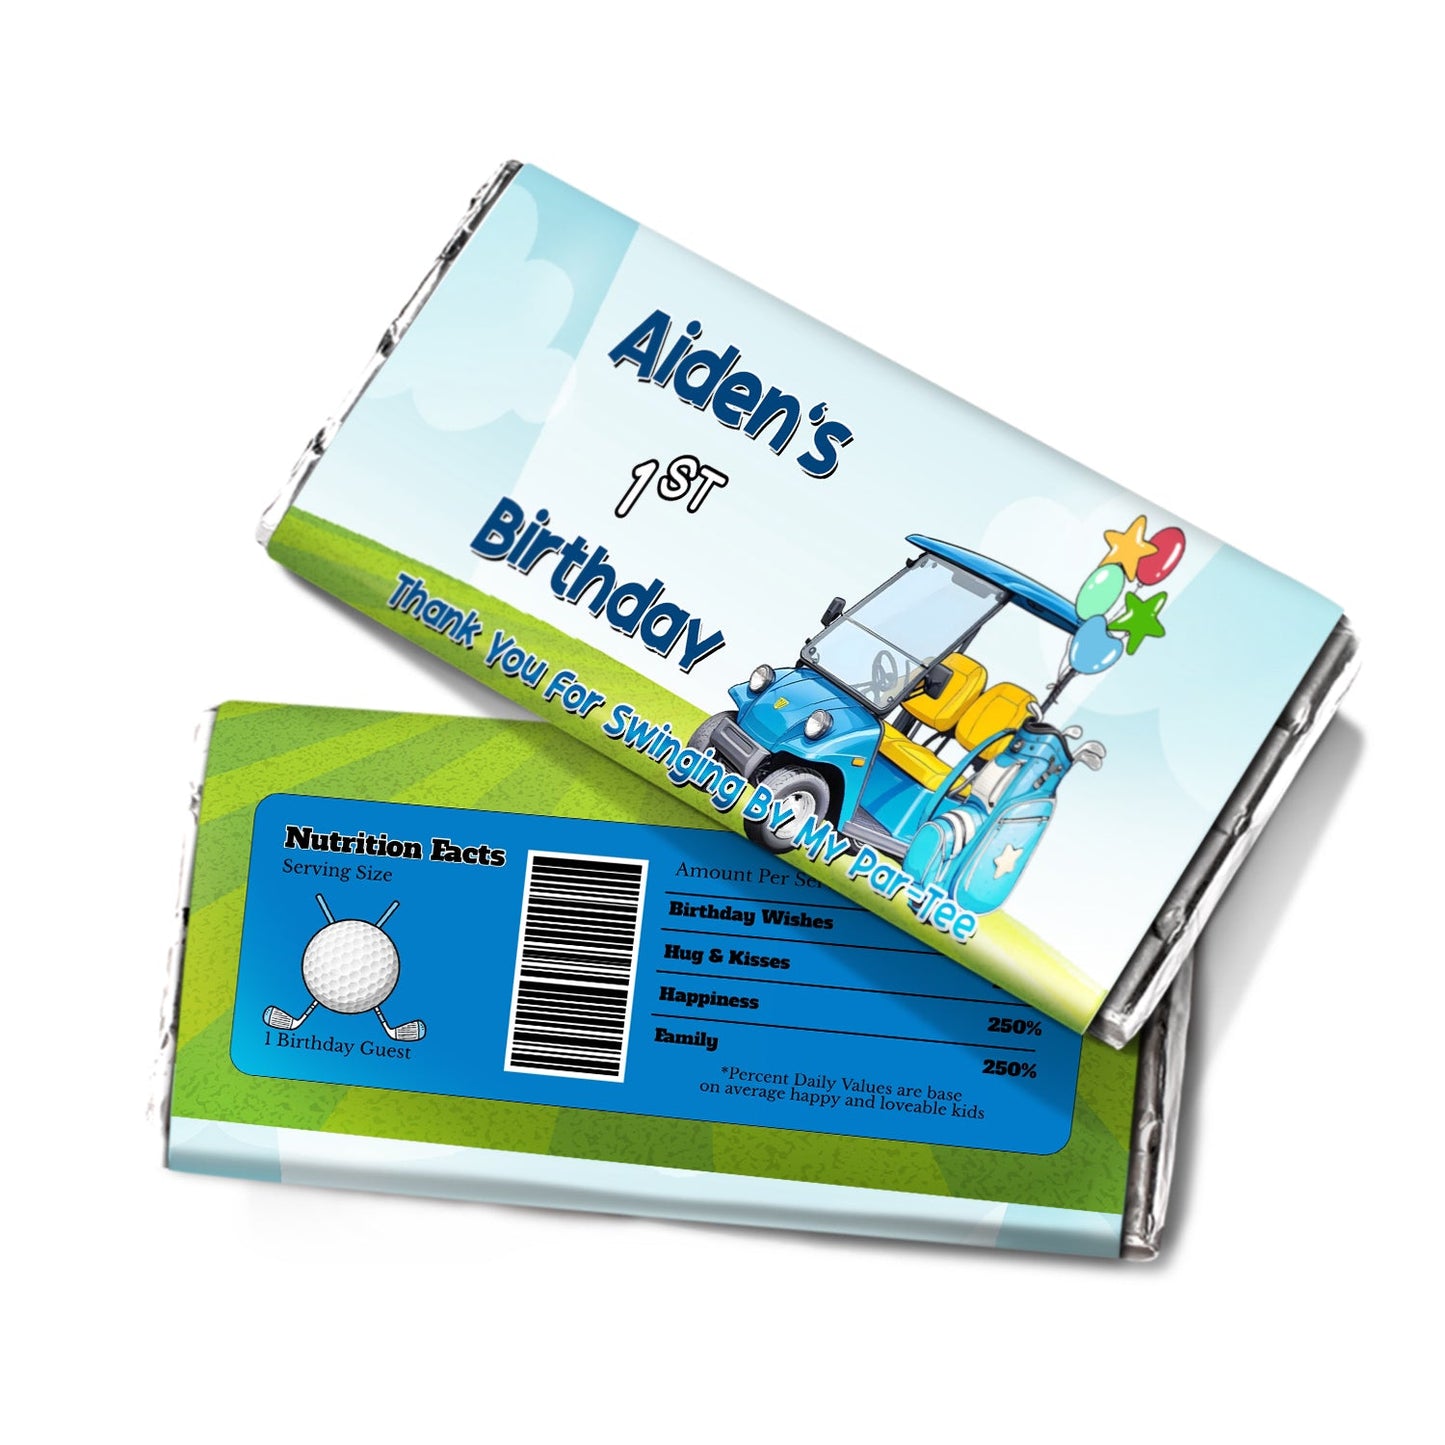 Mini Golf Chocolate Label: Personalized chocolate labels featuring mini golf course images